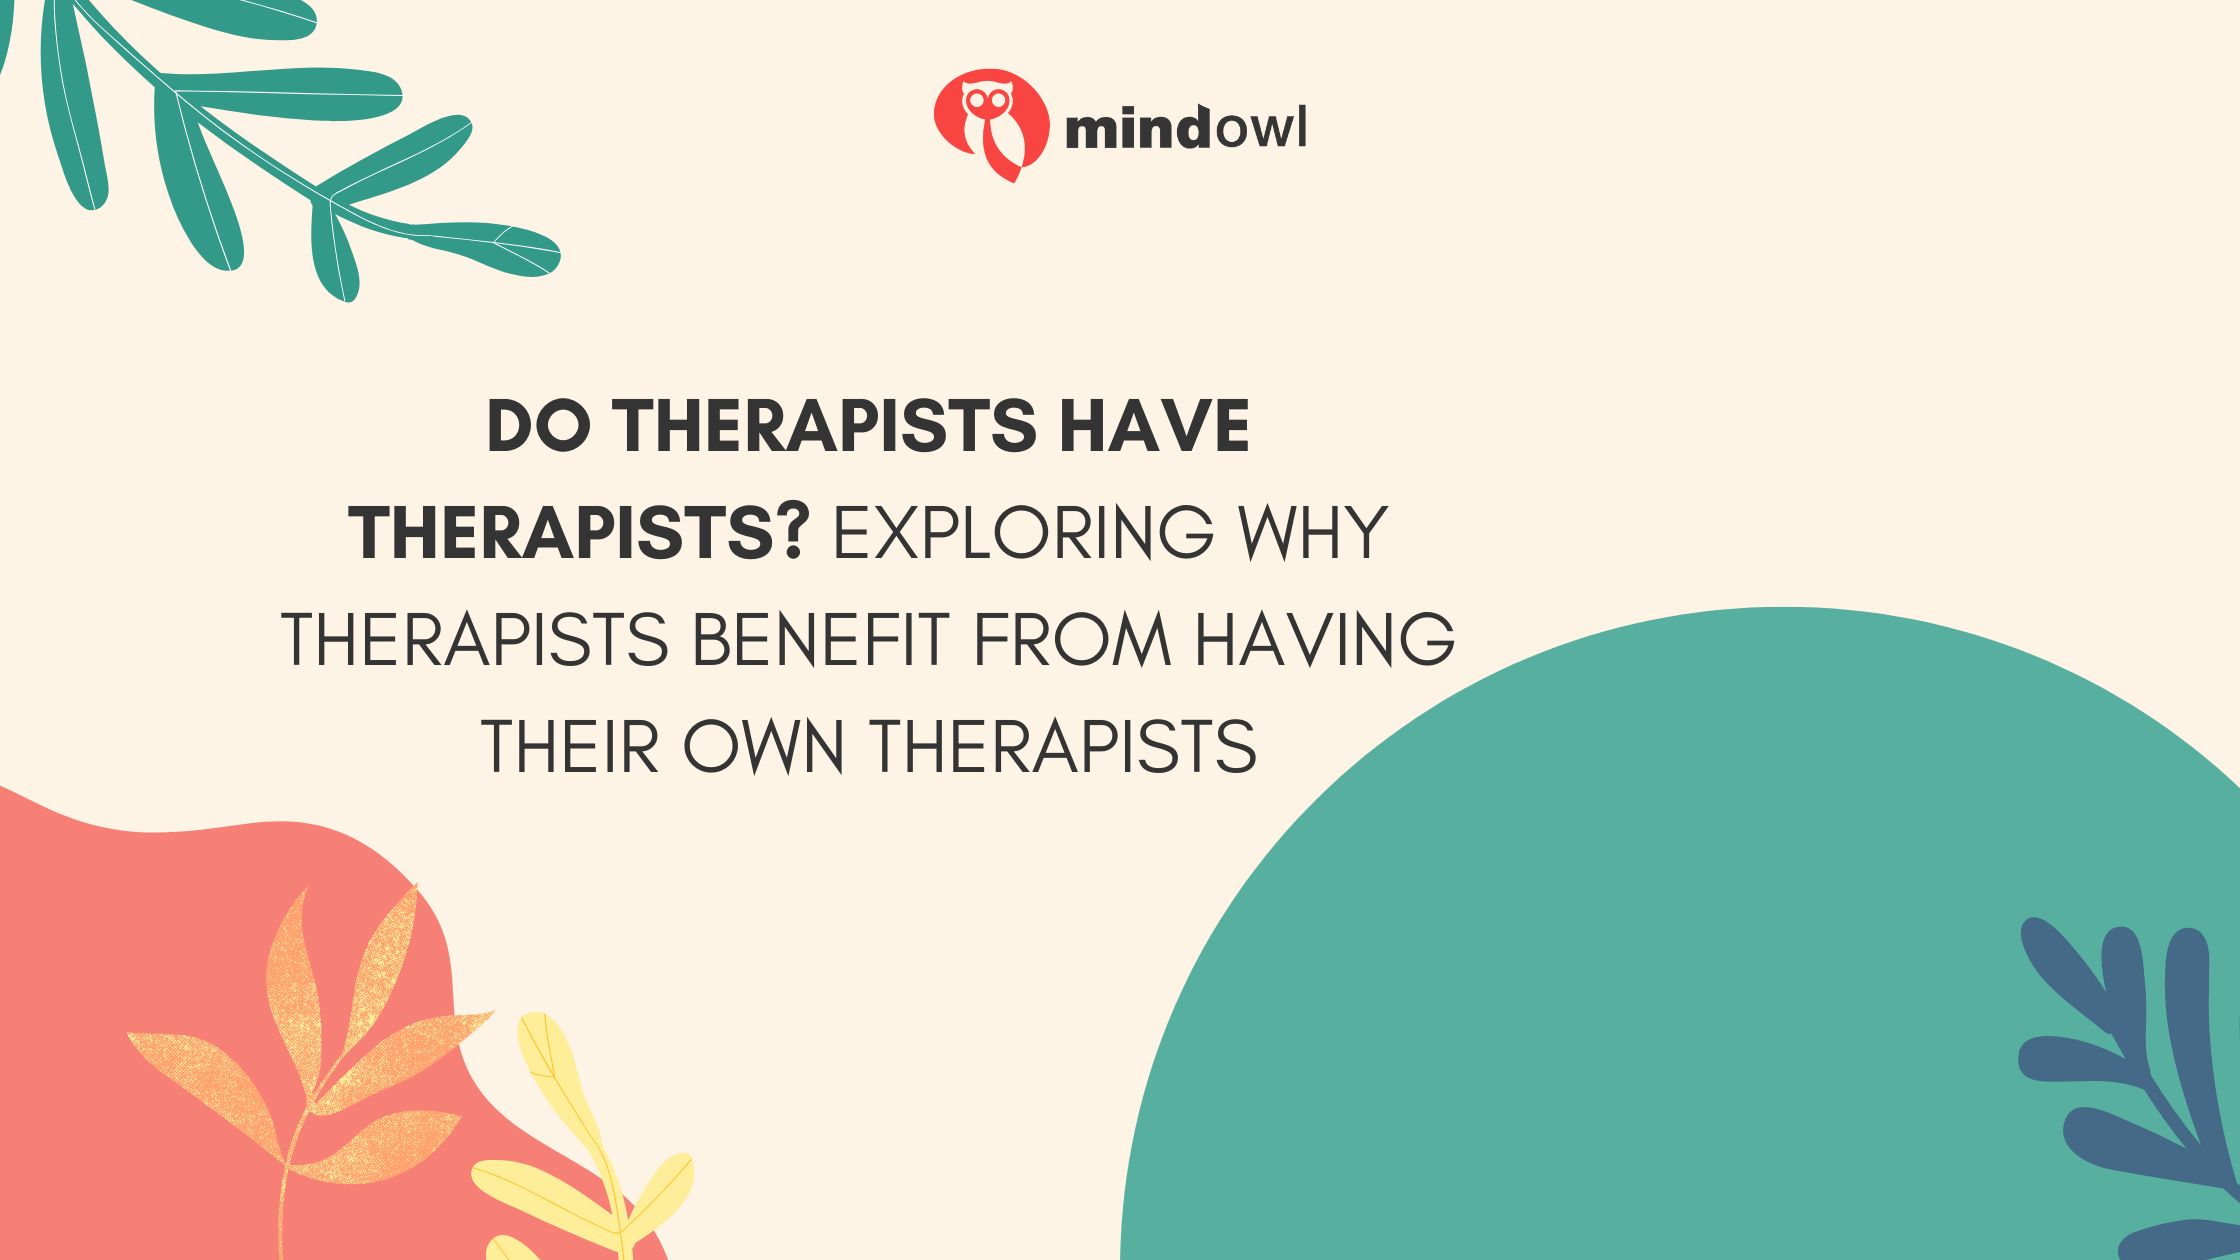 Do Therapists Have Therapists? Exploring Why Therapists Benefit From Having Their Own Therapists